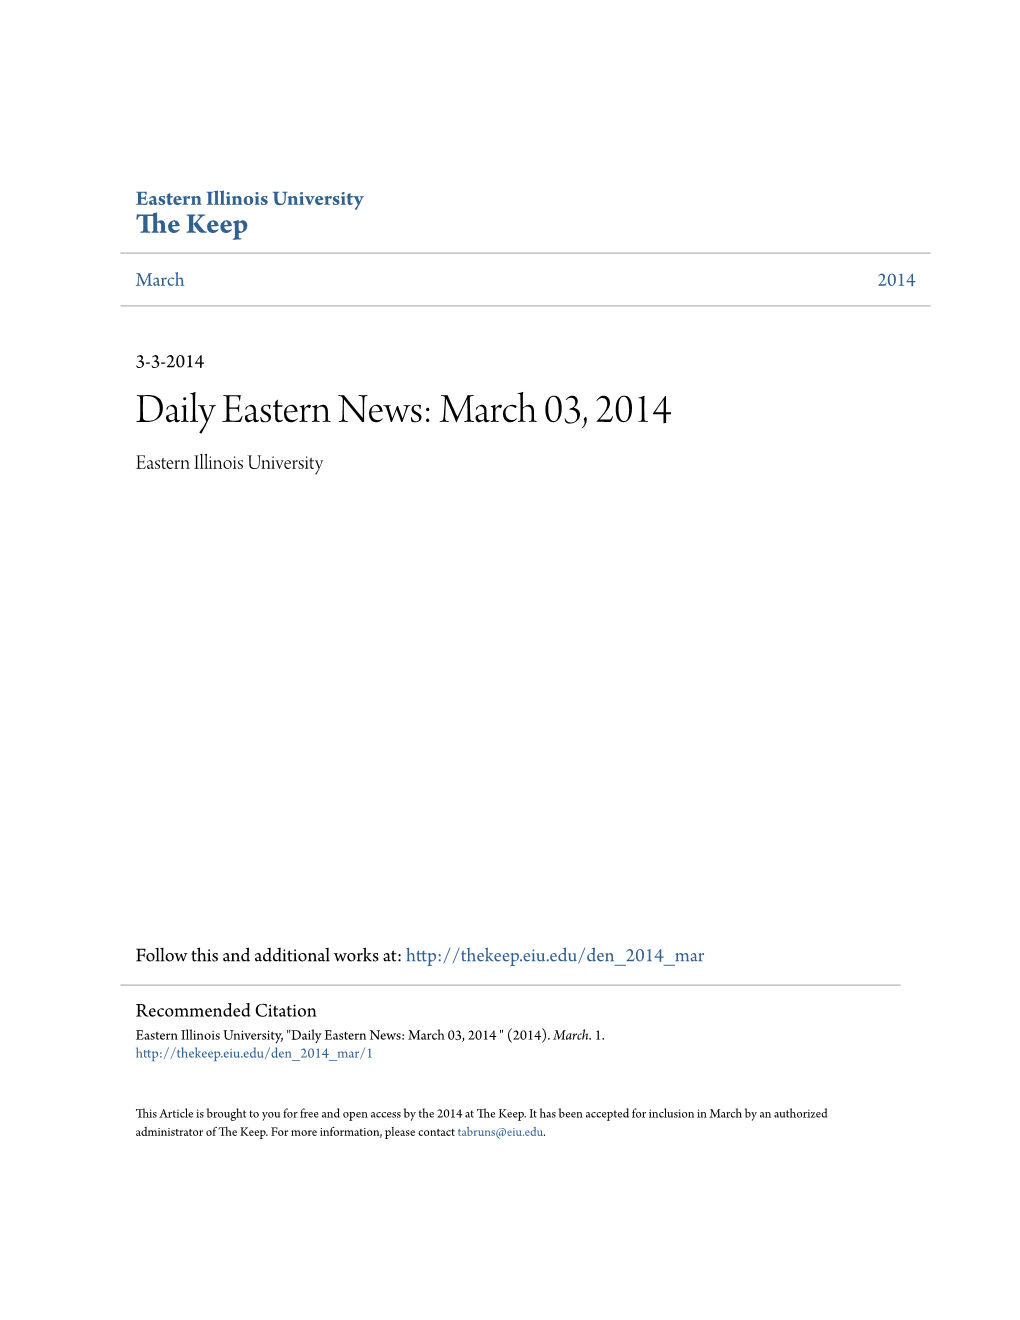 Daily Eastern News: March 03, 2014 Eastern Illinois University